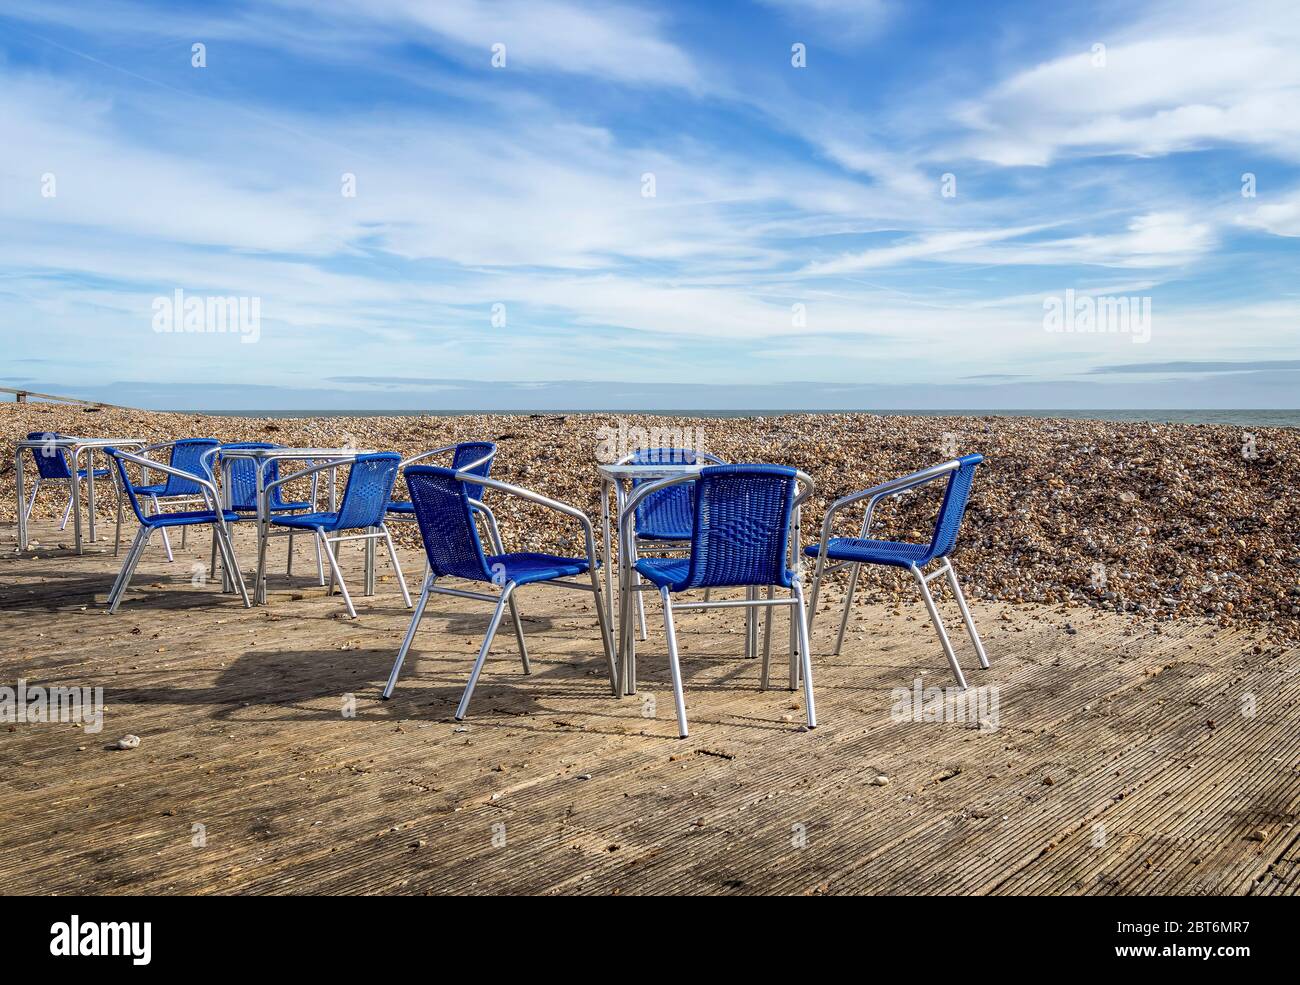 Beach cafe terrace, UK, deserted with no customers. Empty chairs. Stock Photo